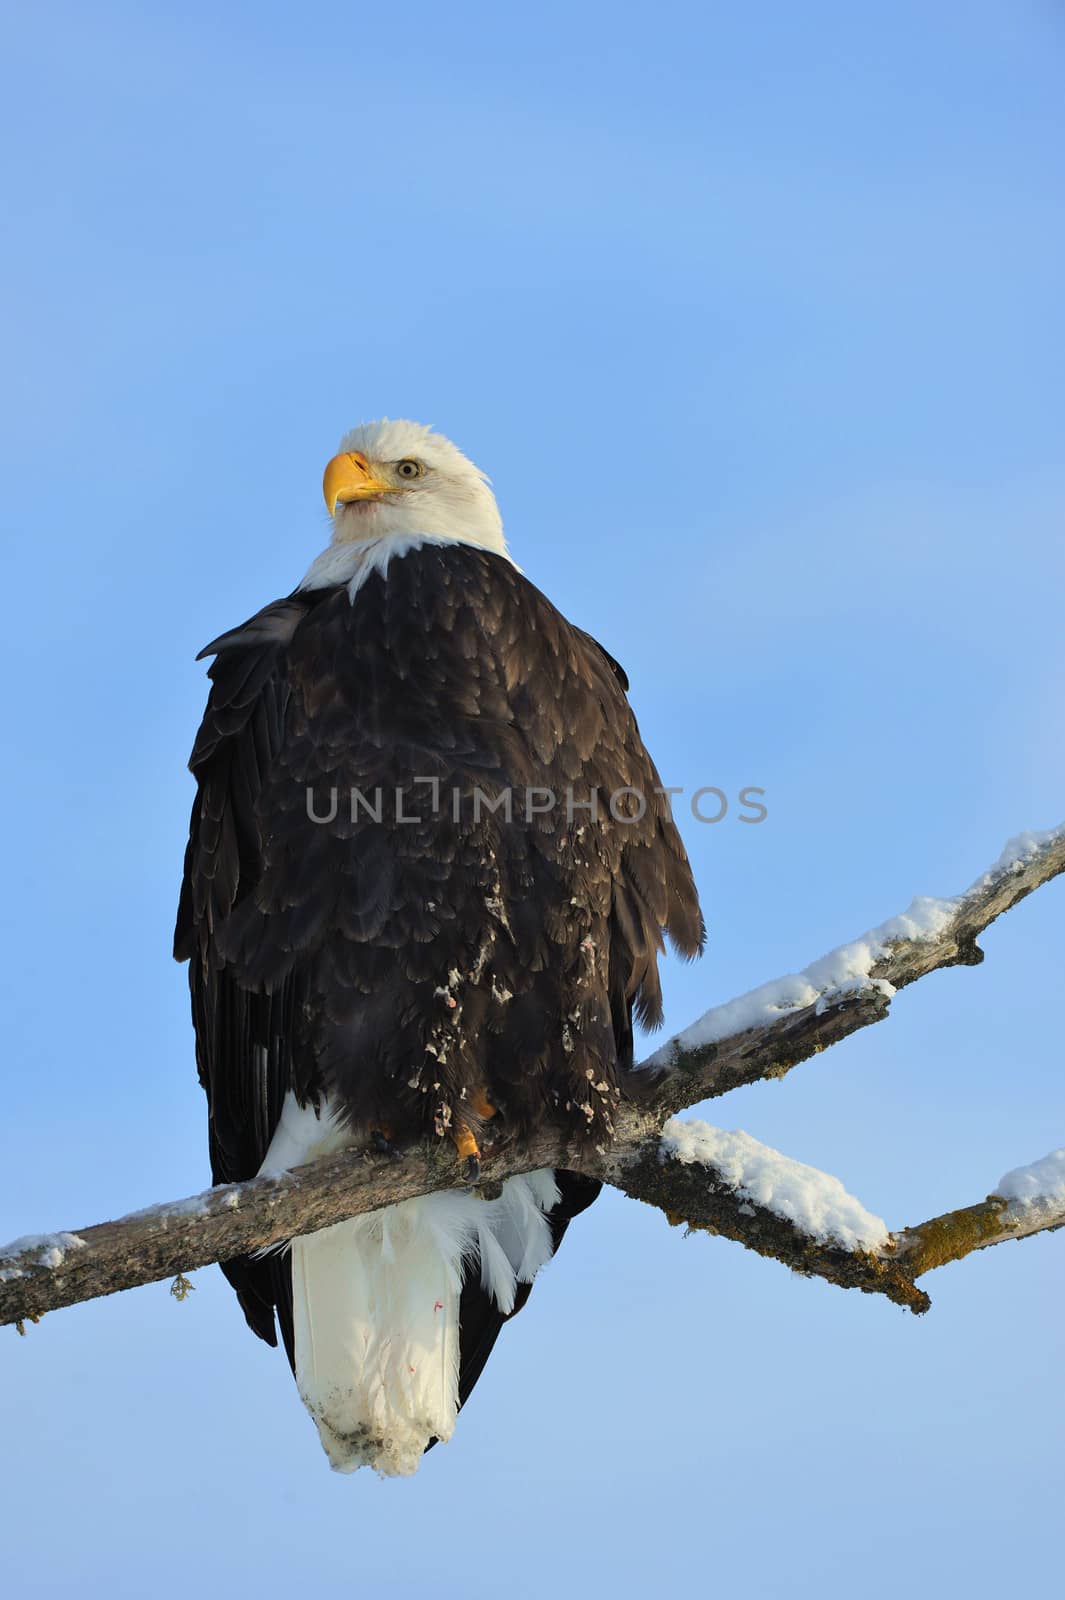 A bald eagle (Haliaeetus leucocephalus) is perched on a dead tree limb overlooking the Chilkat River watching for salmon in the Chilkat Bald Eagle Preserve in Southeast Alaska. Winter.